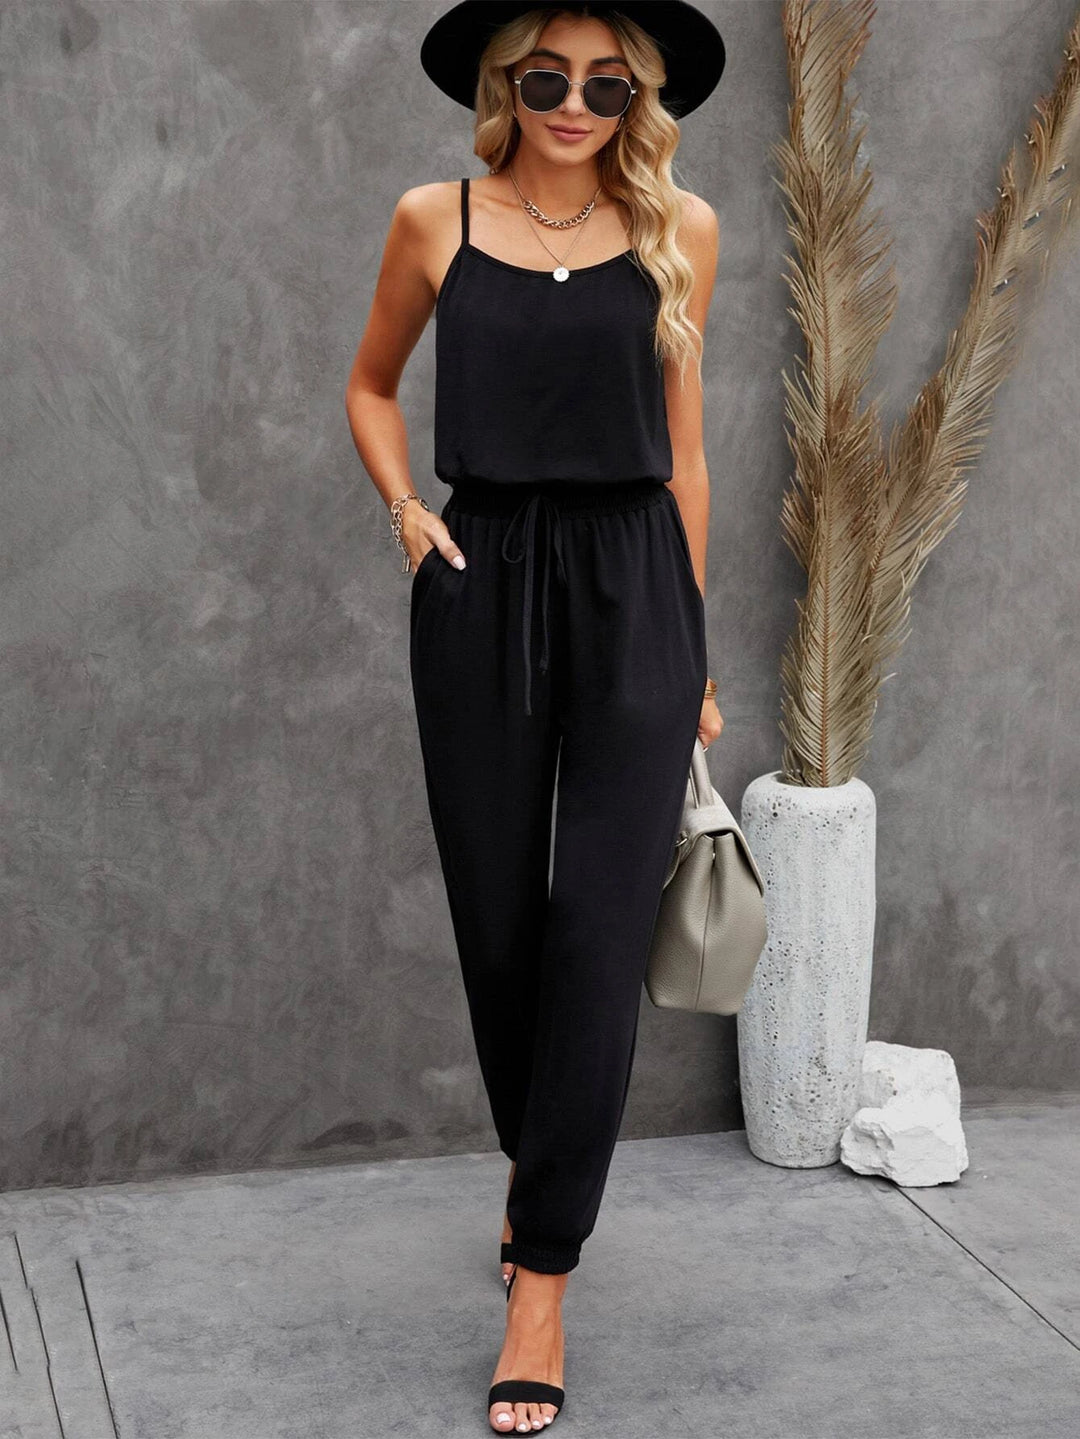 Solid Knot Front Cami Jumpsuit